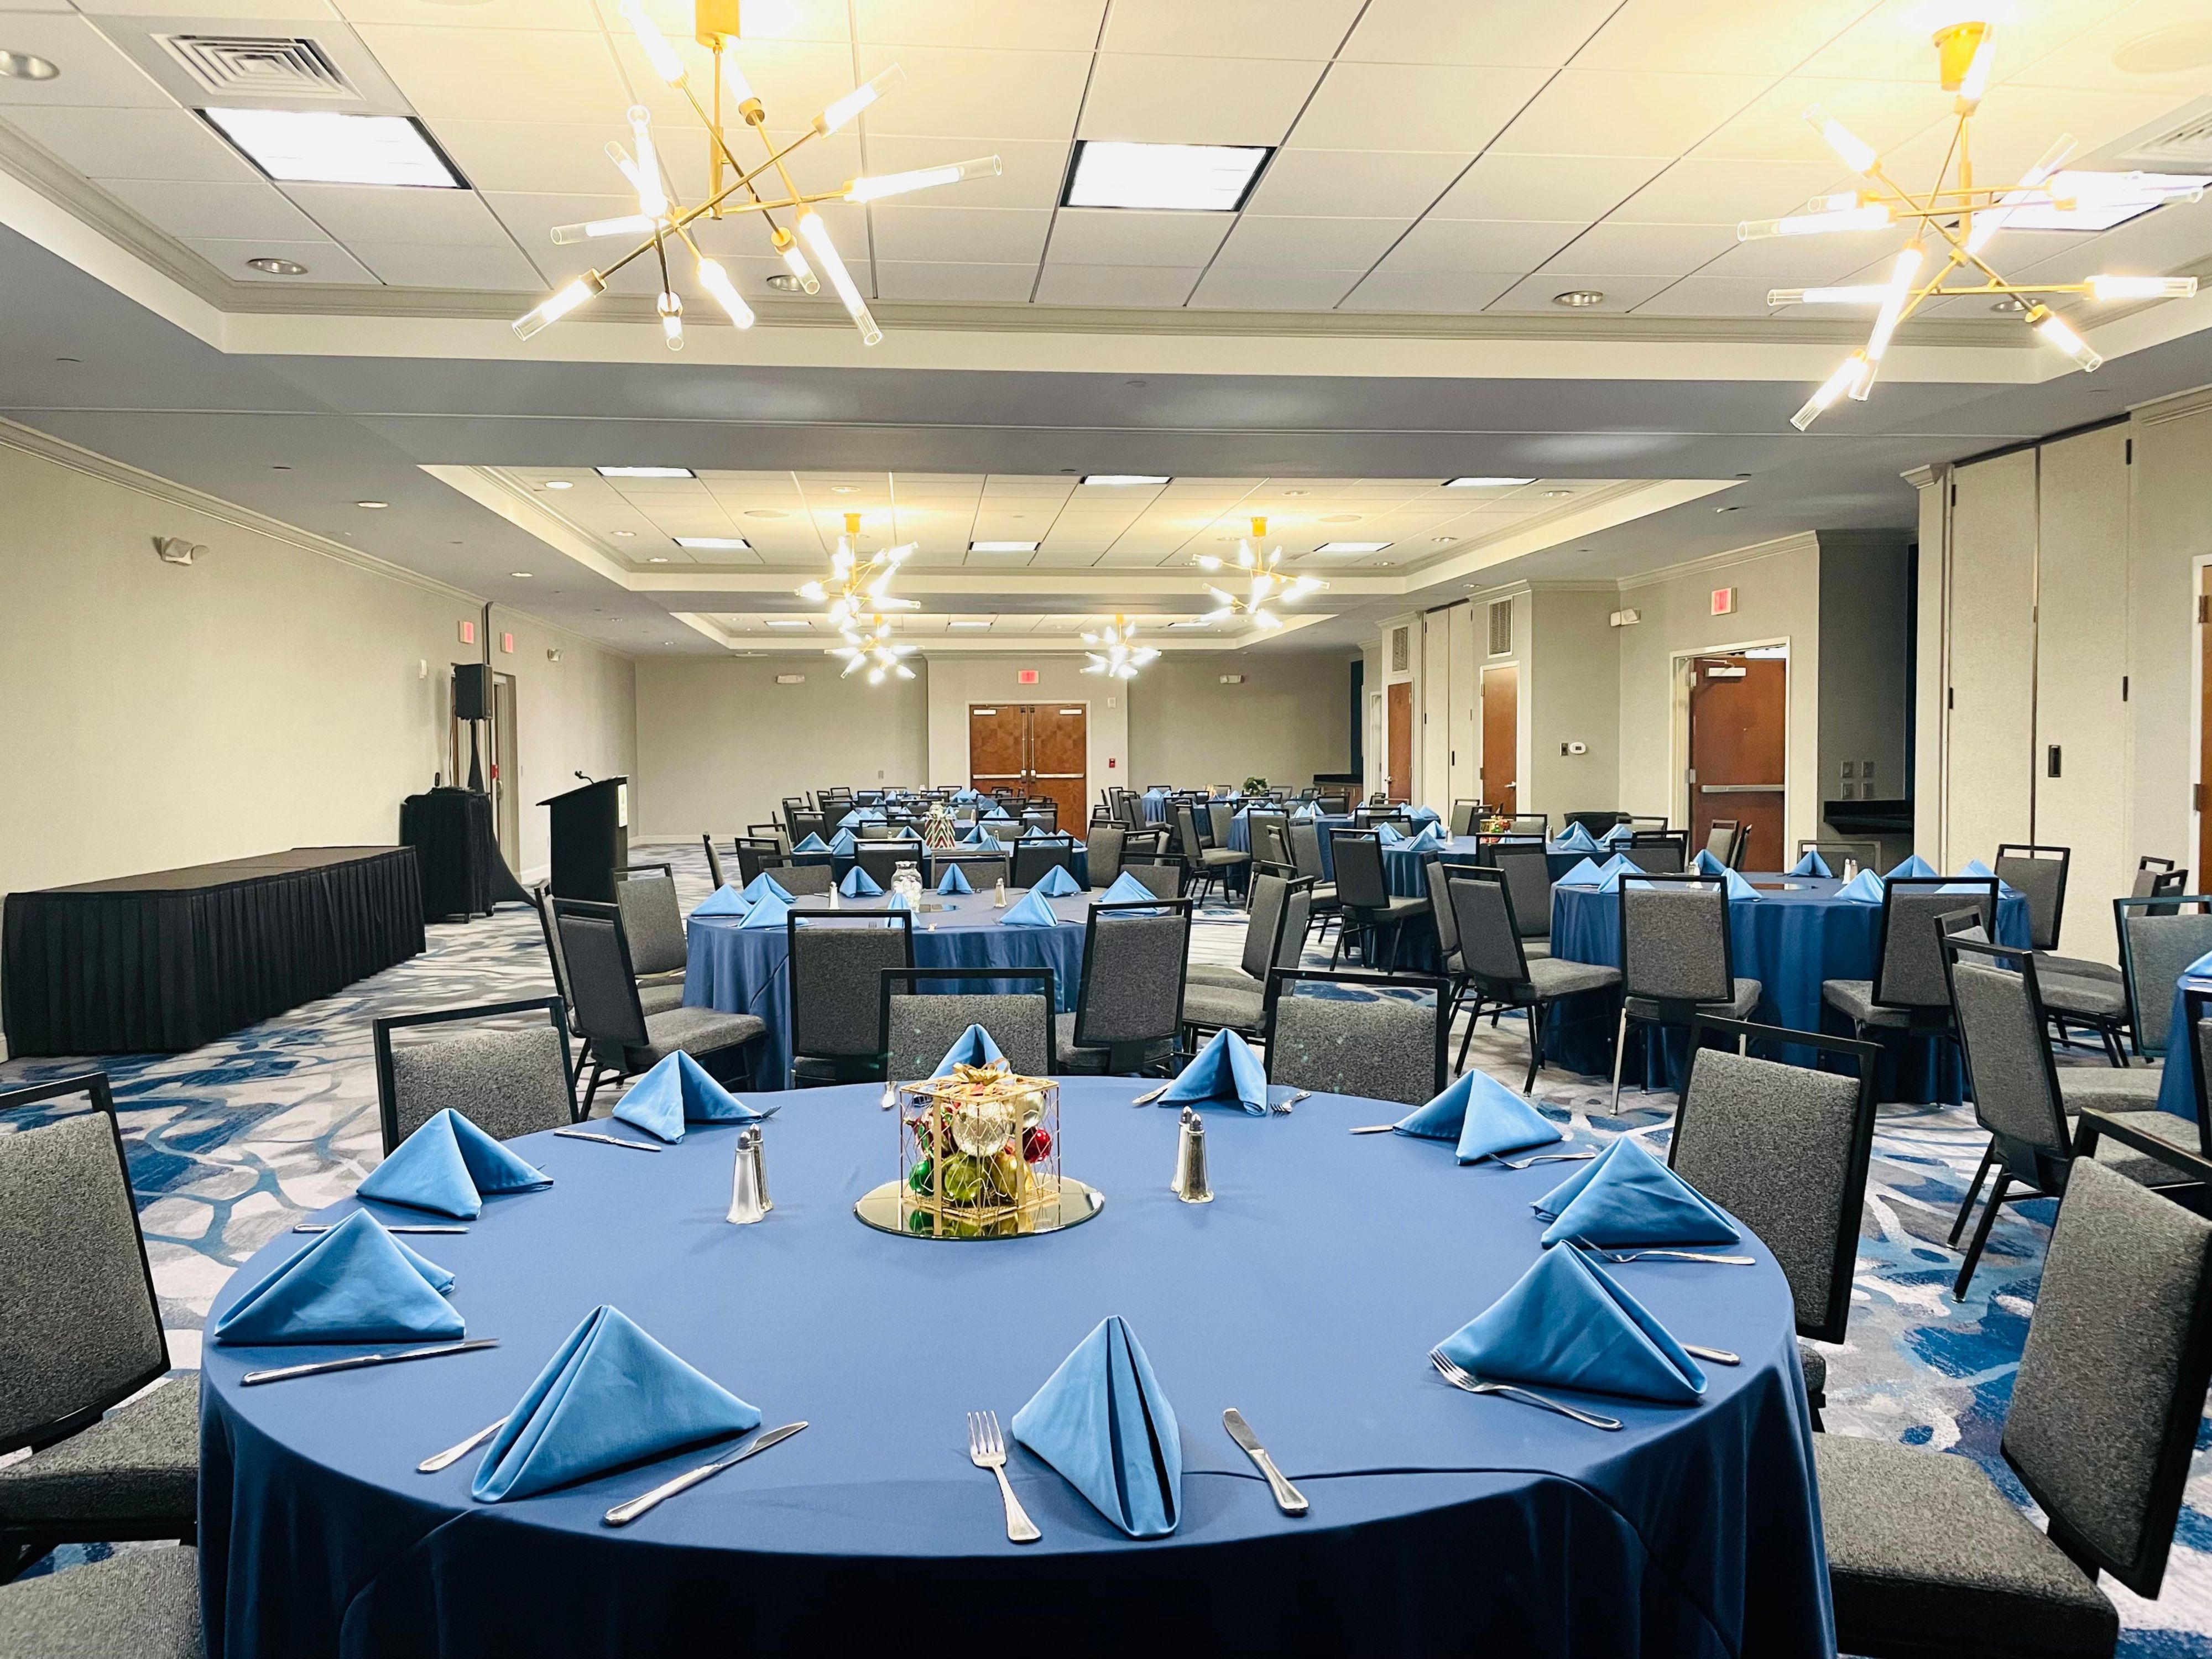 Traveling to FGCU or planning an event near FGCU? The Crowne Plaza Ft. Myers Gulf Coast located only 2 miles to FGCU campus offers versatile event space for groups of 2 to 200 people. Restaurant and bar, lakeside patio with fire pit, shuttle to/from RSW Airport and FGCU campus, full catering services, group rates will complete the planning.